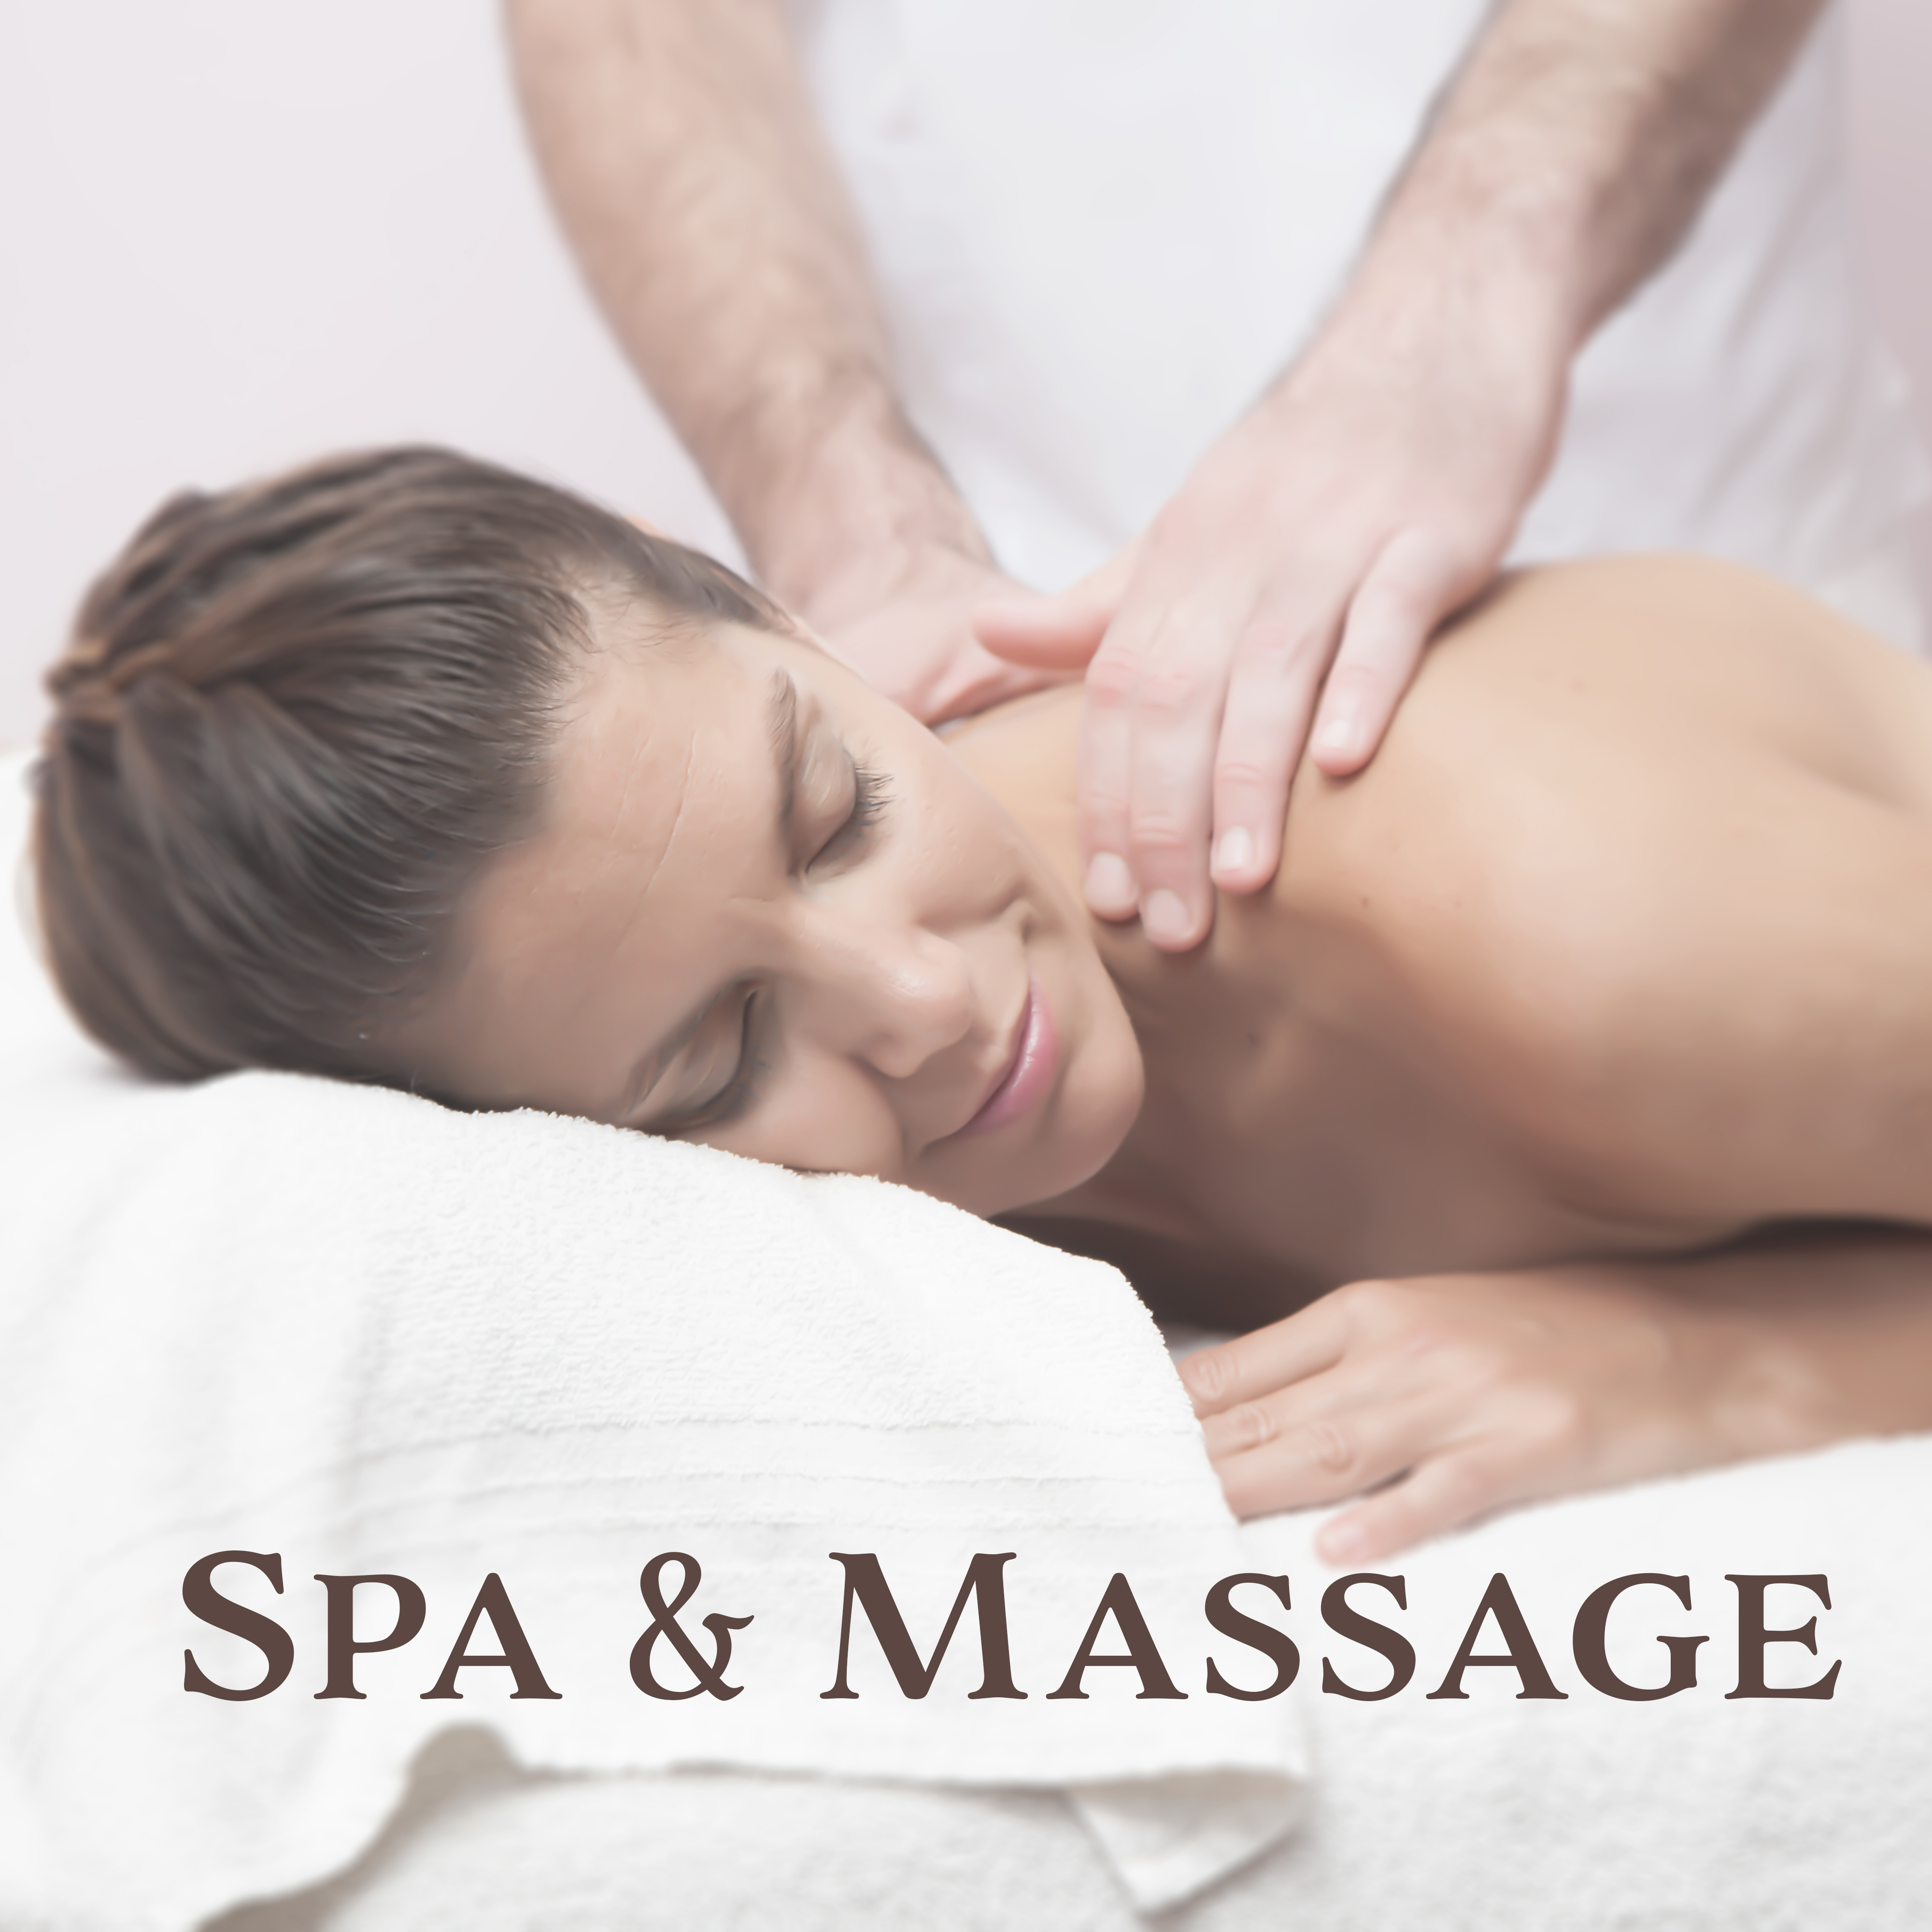 Spa & Massage – Peaceful Music for Wellness, Spa Dreams, Pure Massage, Stress Relief, Zen, Relaxing Therapy, Calm Mind